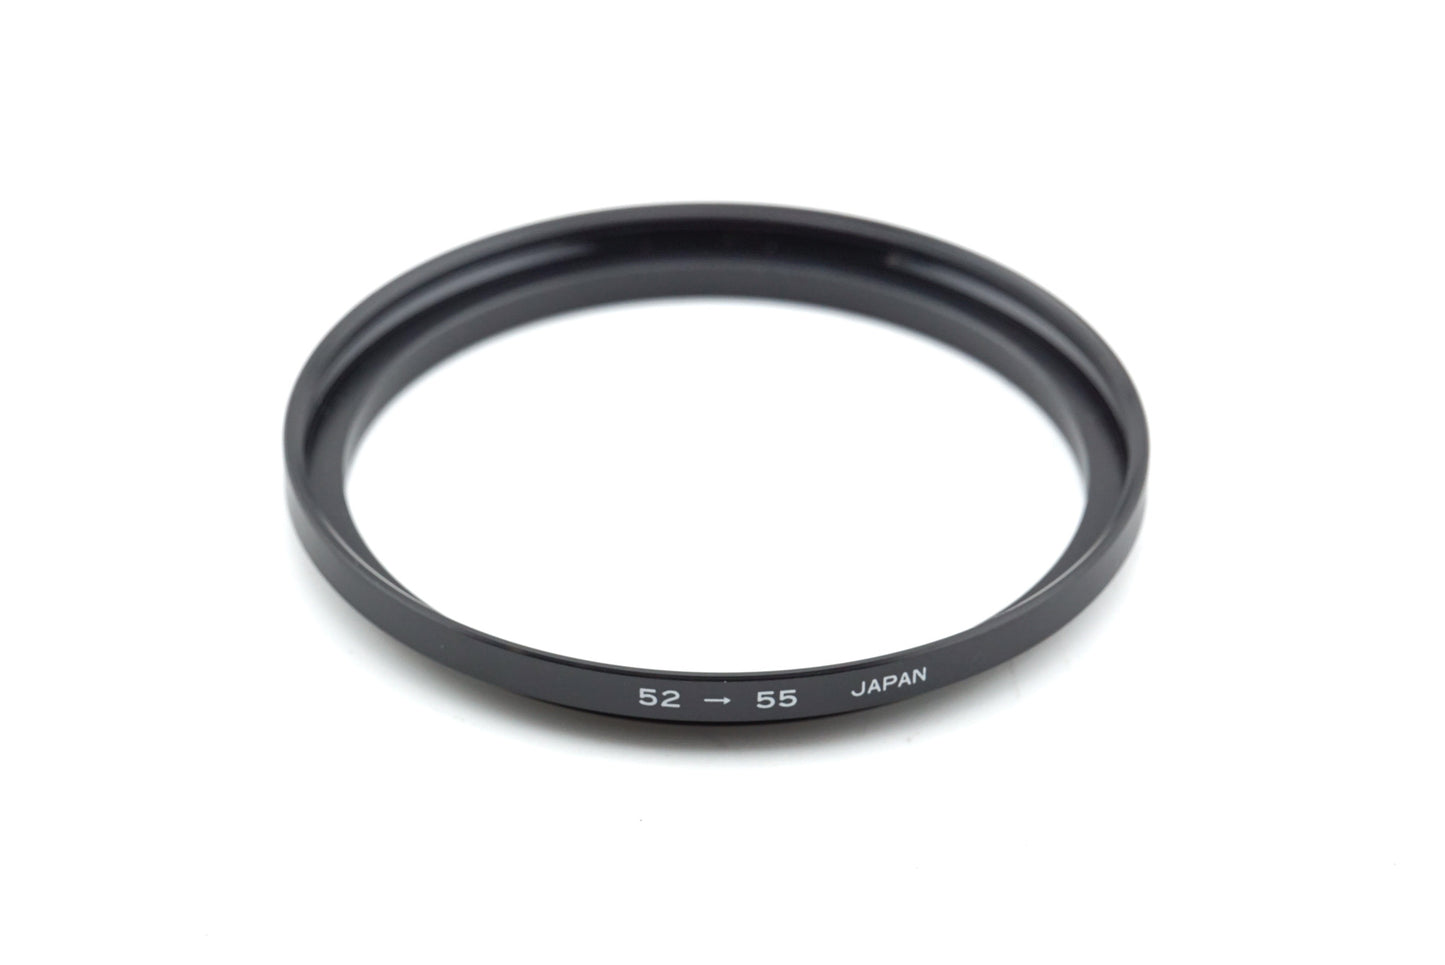 Generic 52mm - 55mm Step-Up Ring - Accessory